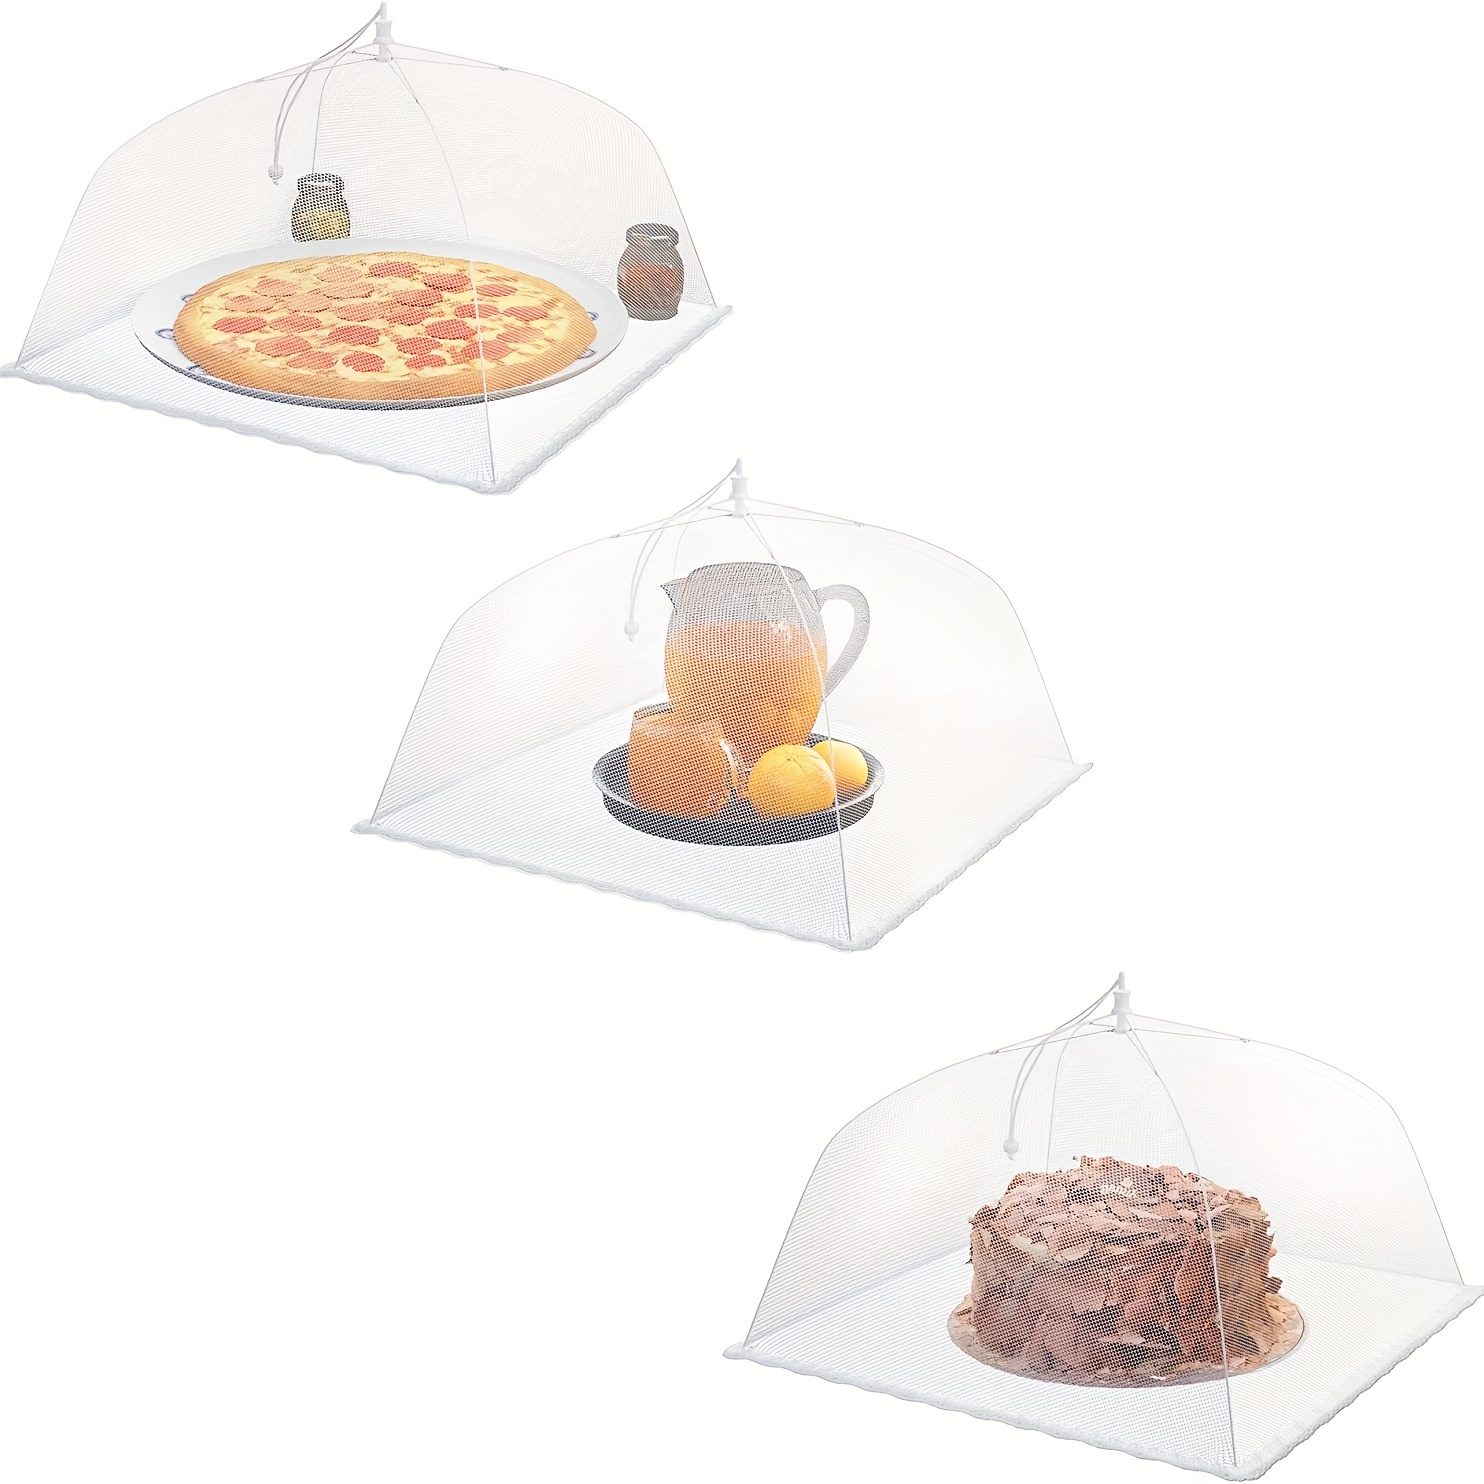 

3 Packs Of Large And Tall Pop-up Mesh Food Covers - Perfect For Outdoor Parties, Picnics, Bbqs, And More!